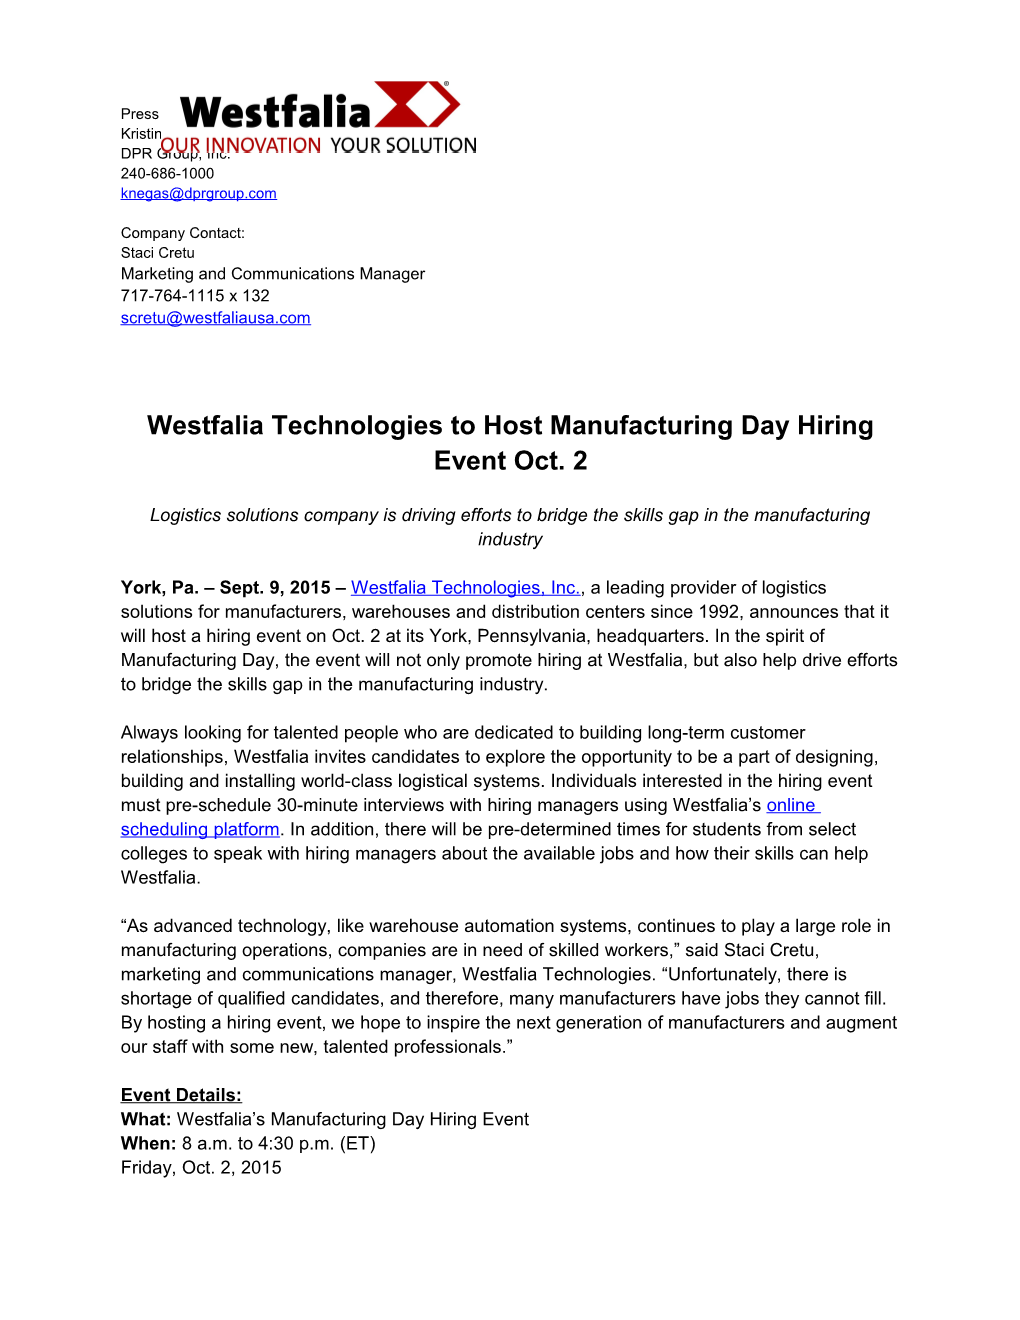 Westfalia Technologies to Host Manufacturing Day Hiring Event Oct. 2